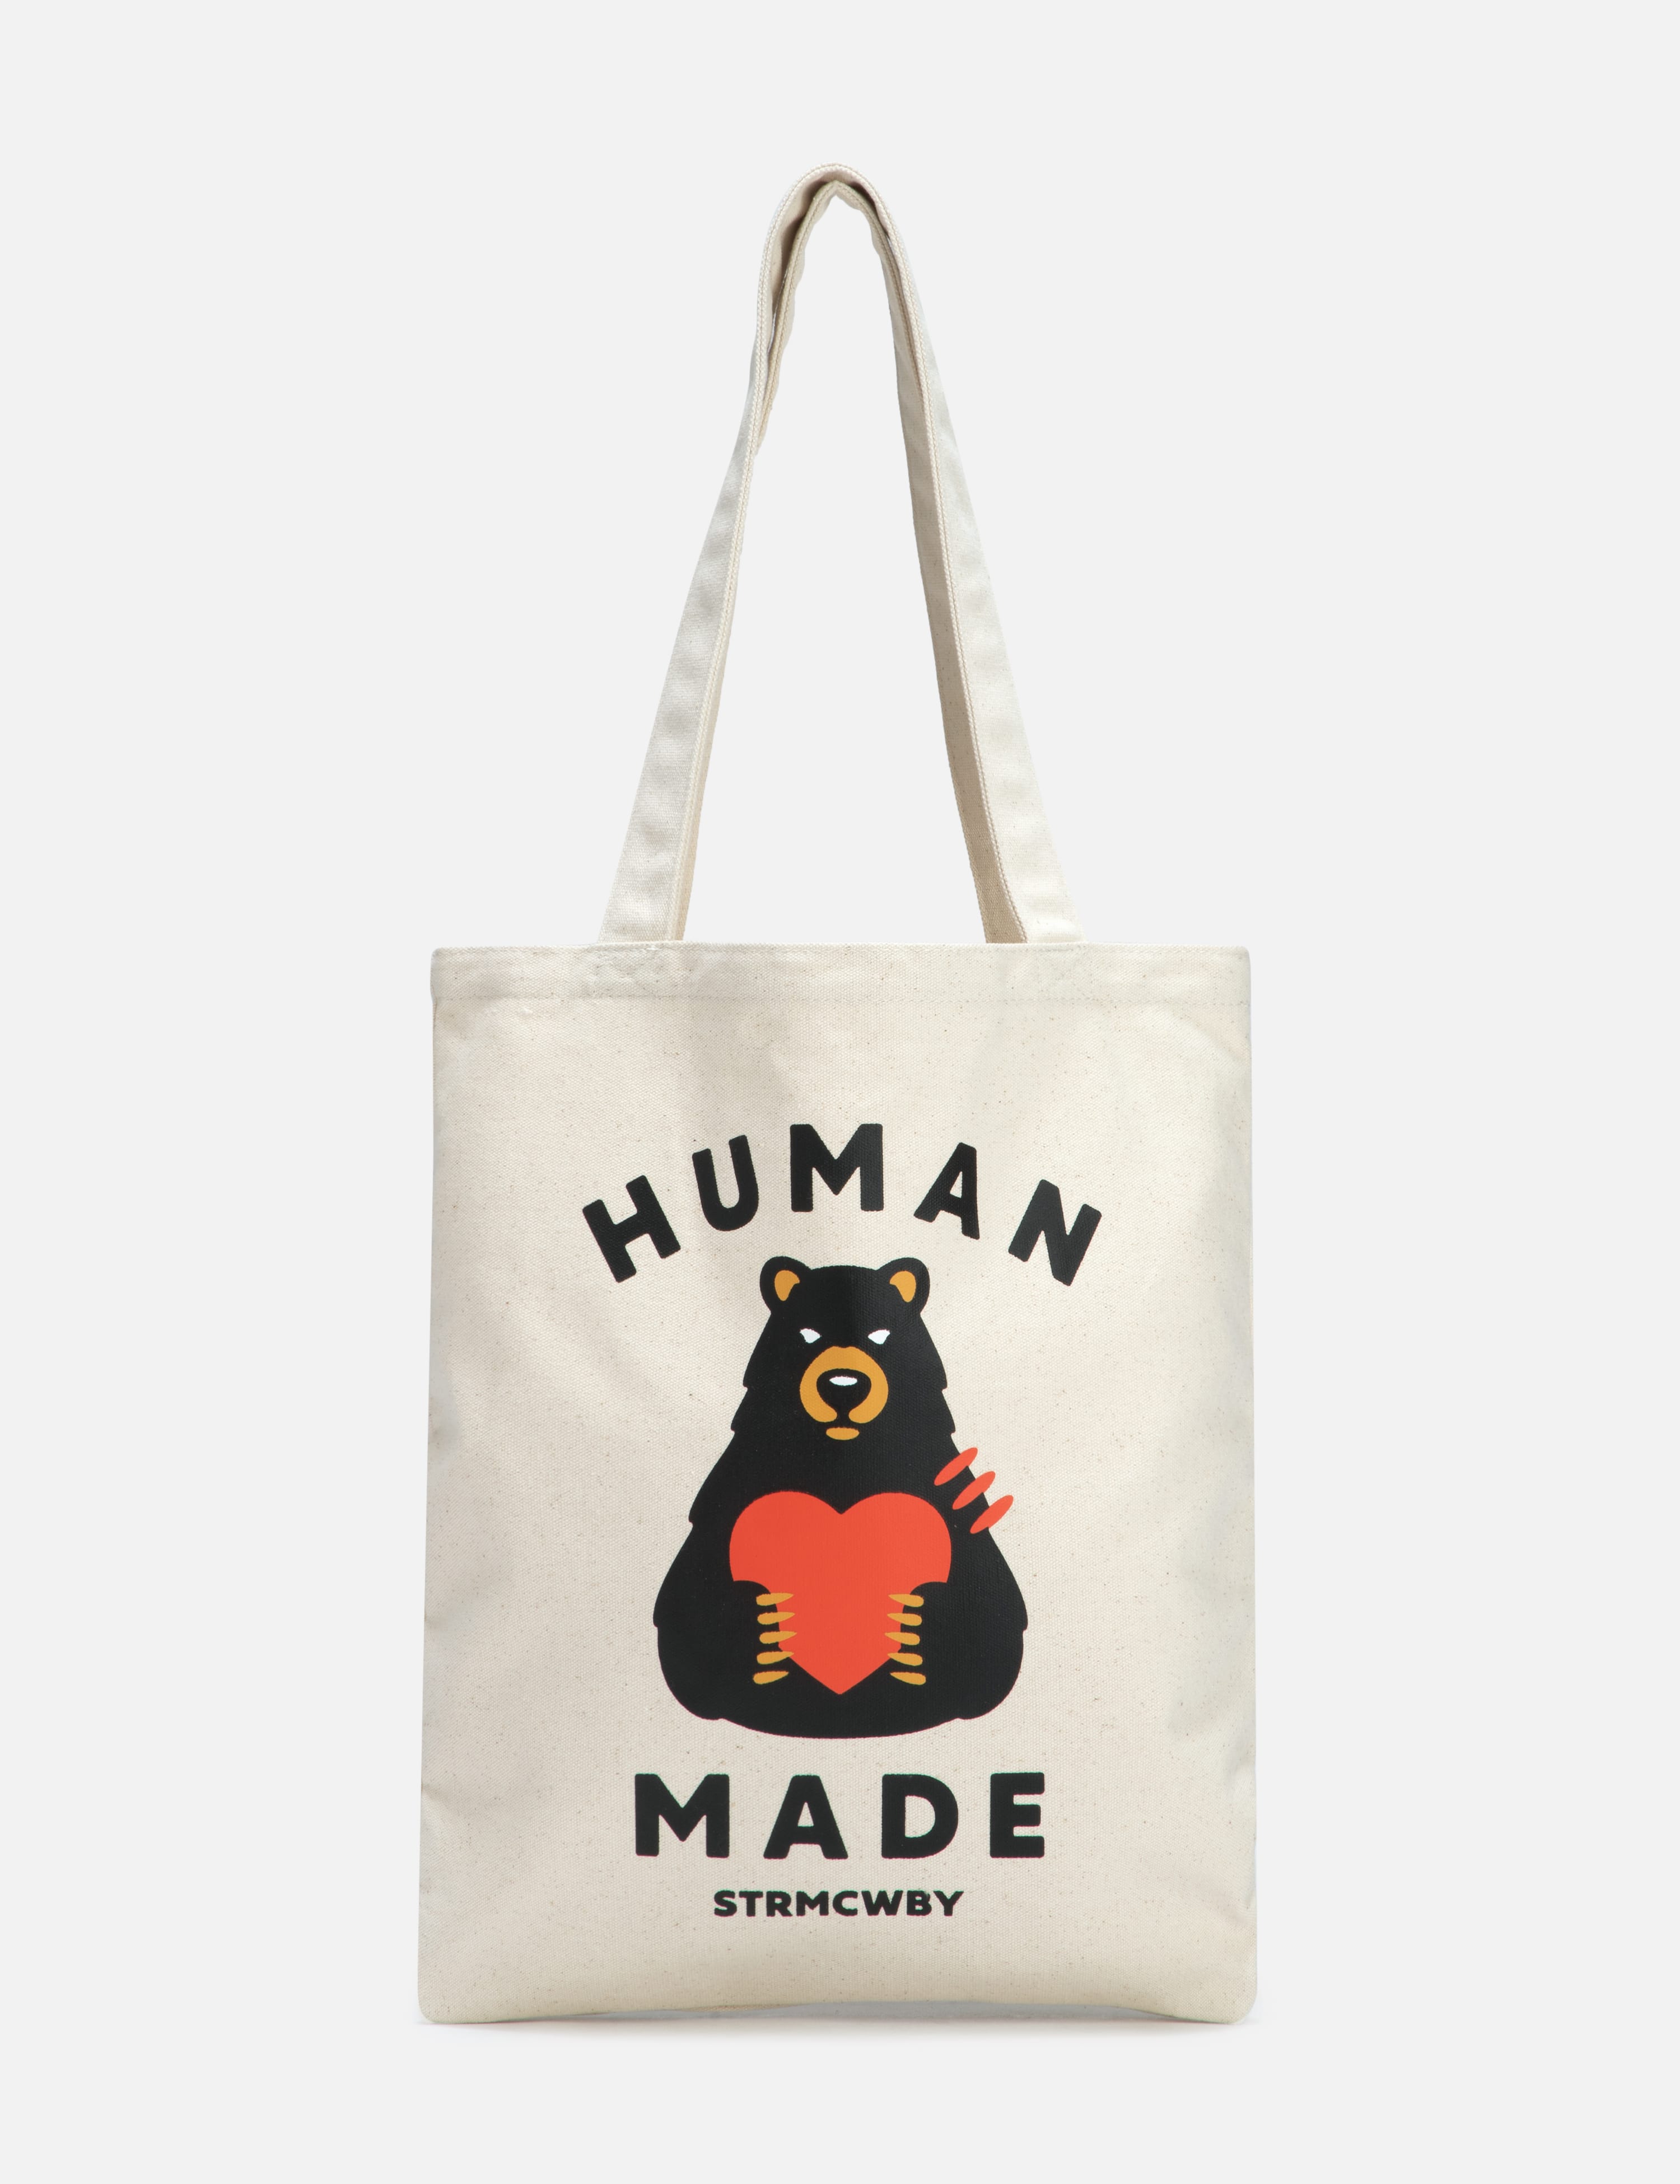 HUMAN MADE BOOK TOTE SAPPORO トートバッグ　札幌